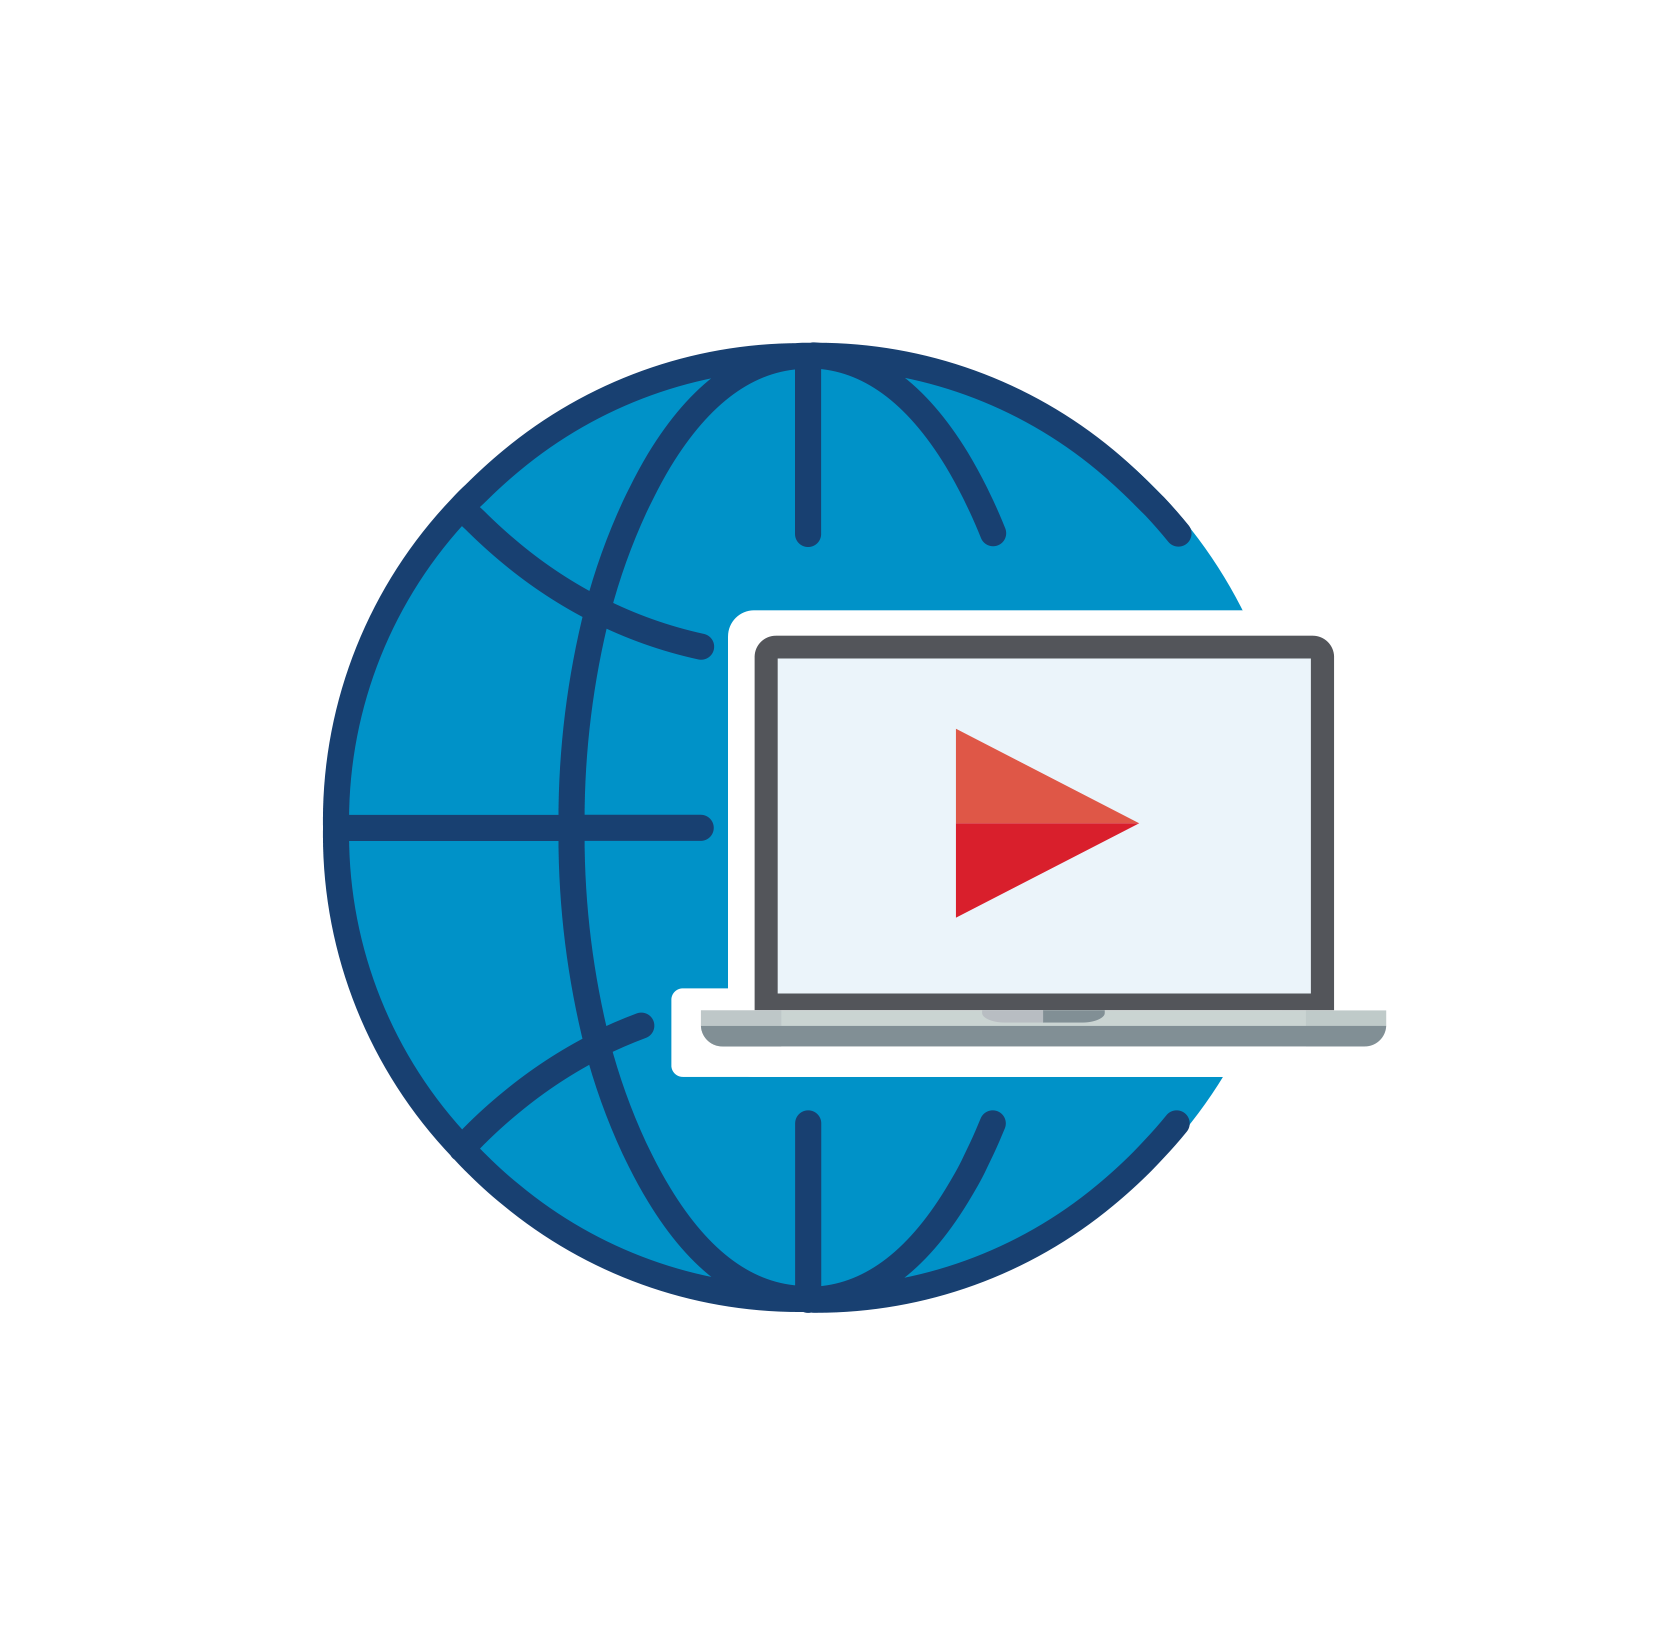 Light blue globe with dark blue axis outlines. A laptop computer with a red play button is in front of globe.